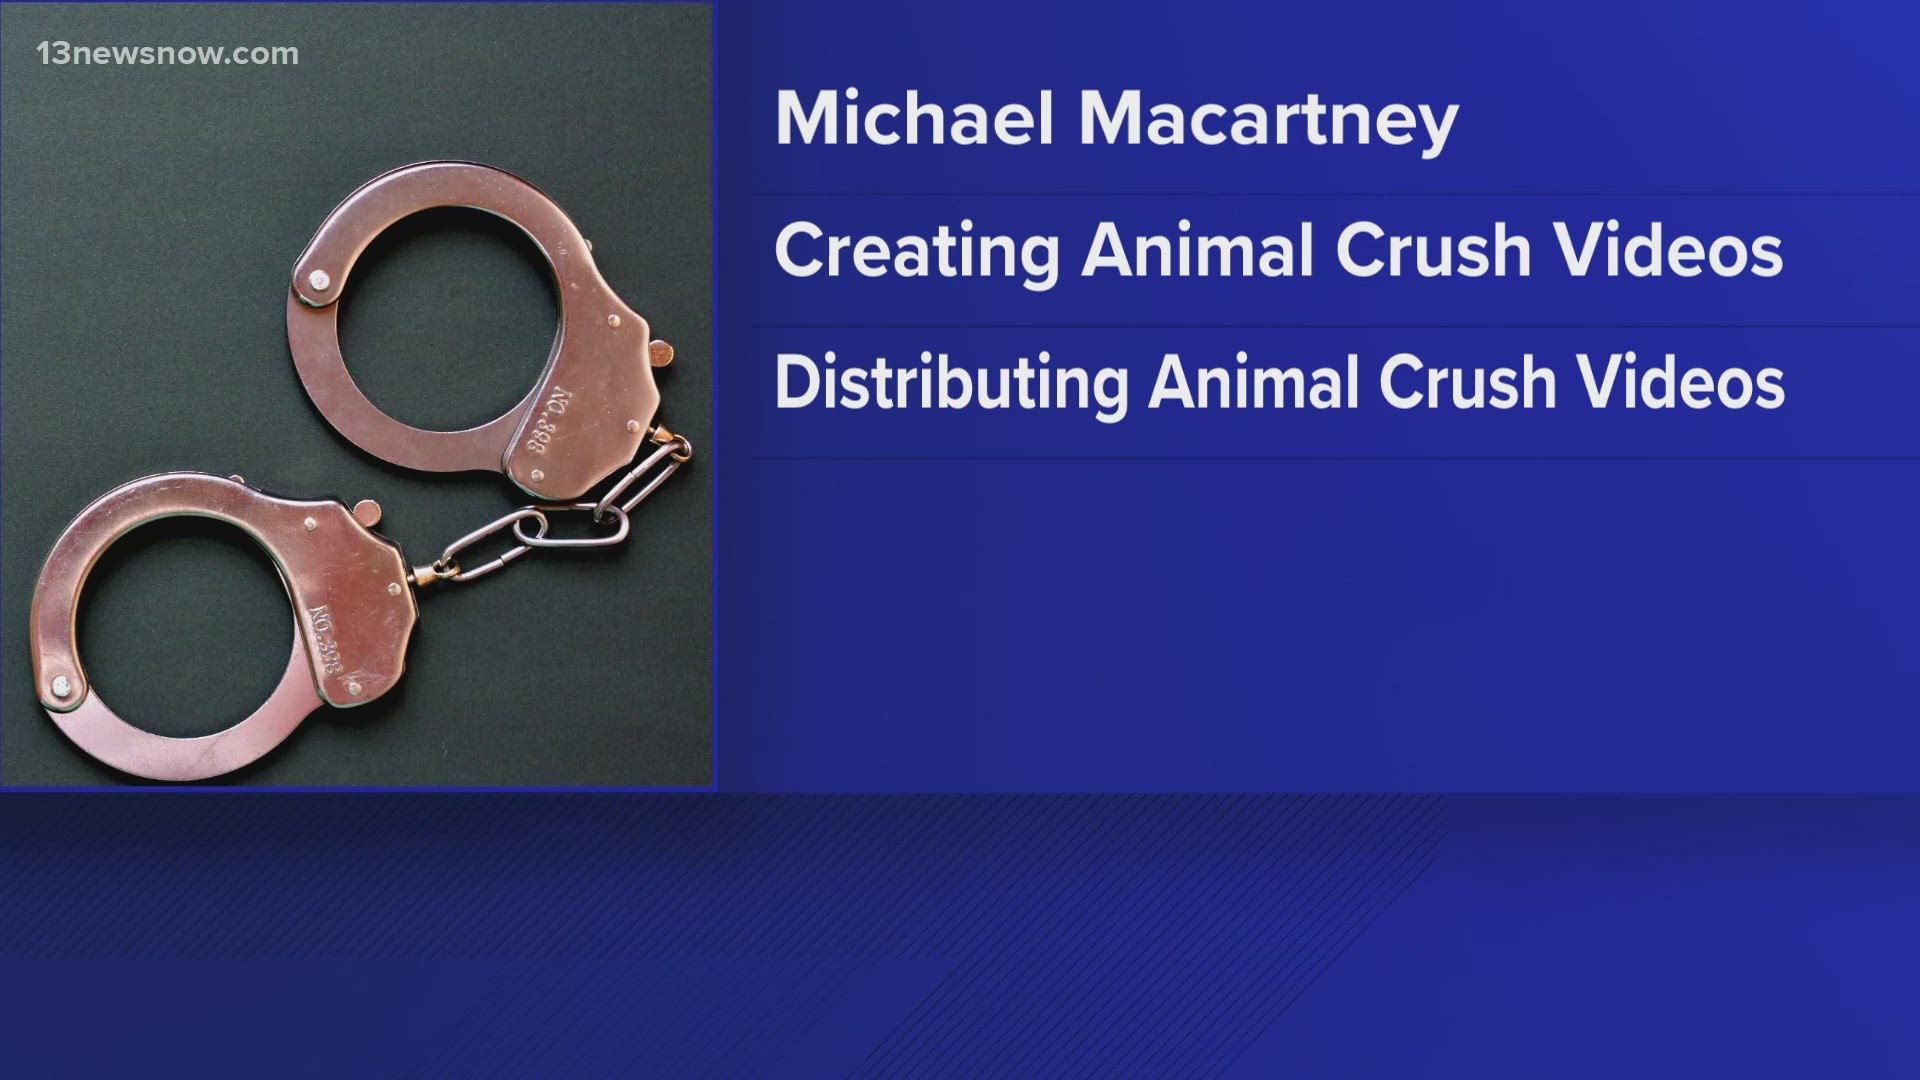 50-year-old Michael Macartney is accused of being part of an international ring that circulated videos of small animals usually monkeys being tortured and killed.